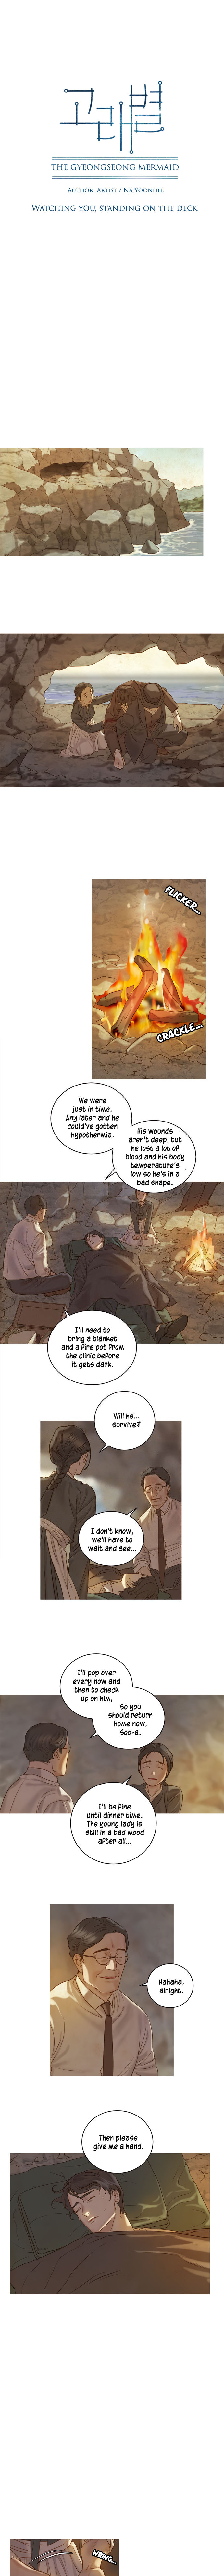 The Whale Star - The Gyeongseong Mermaid - Chapter 2 Page 2